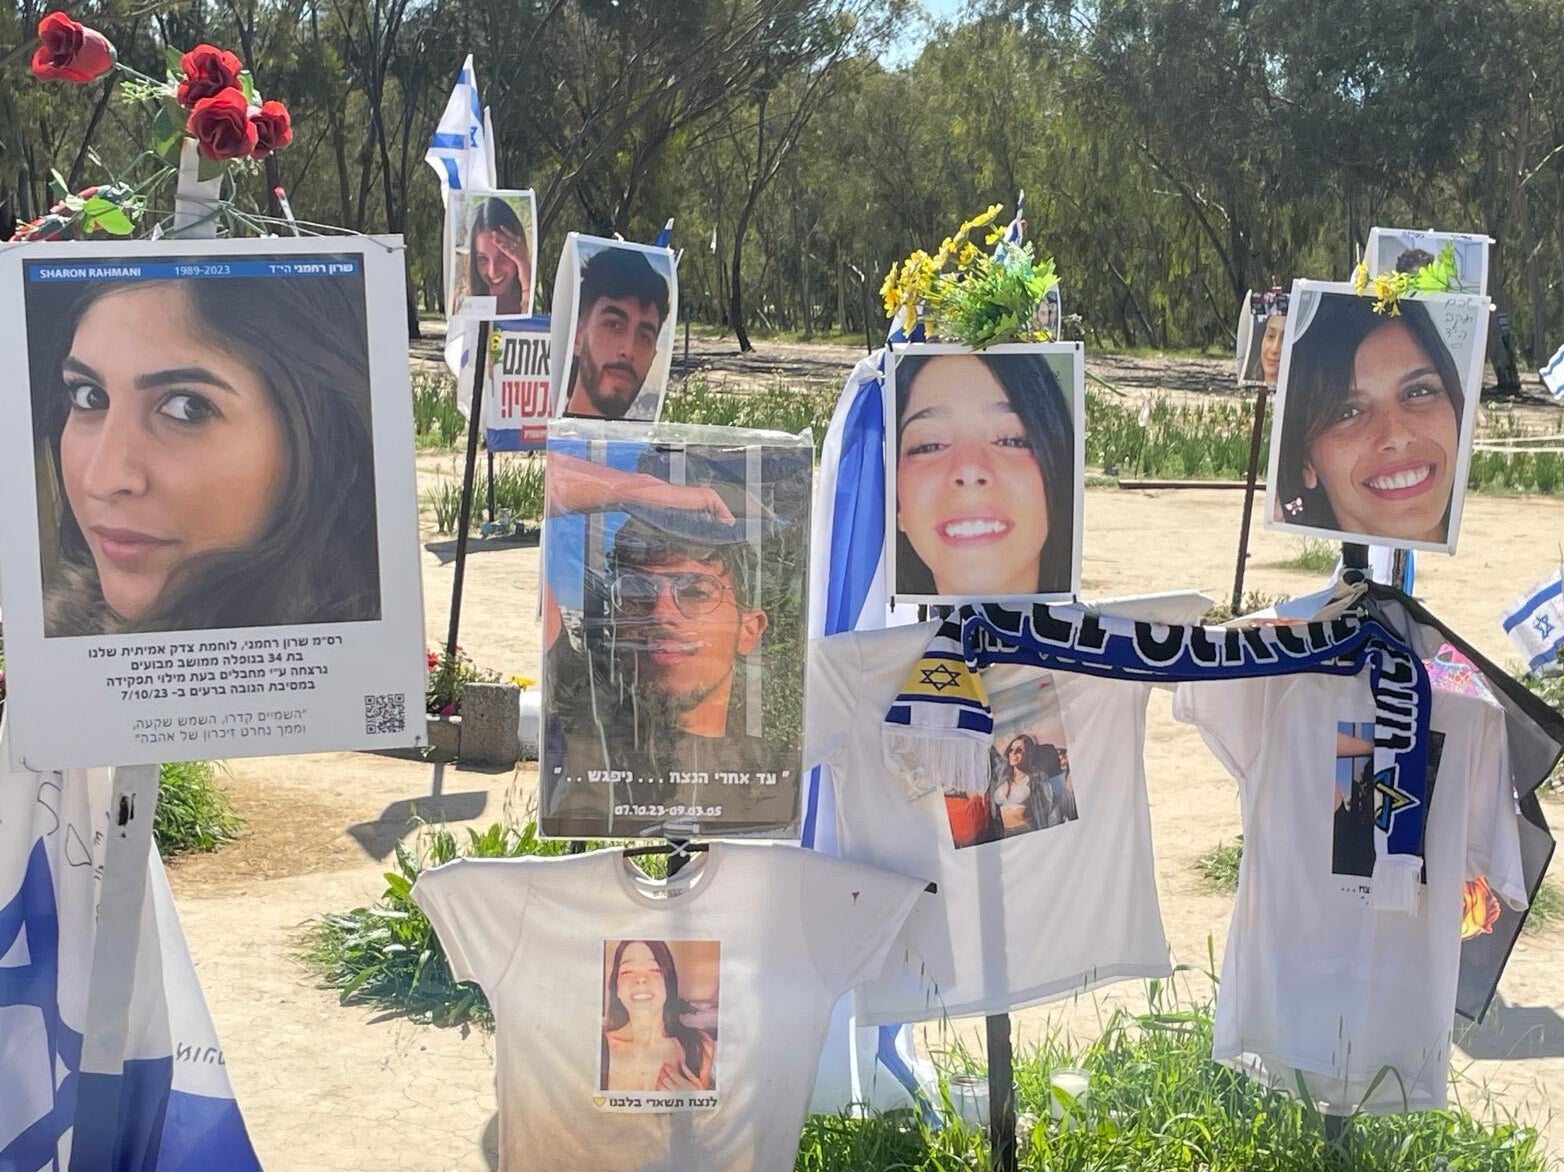 Paying tribute to some of those killed or kidnapped in the Hamas attack in Kfar Aza